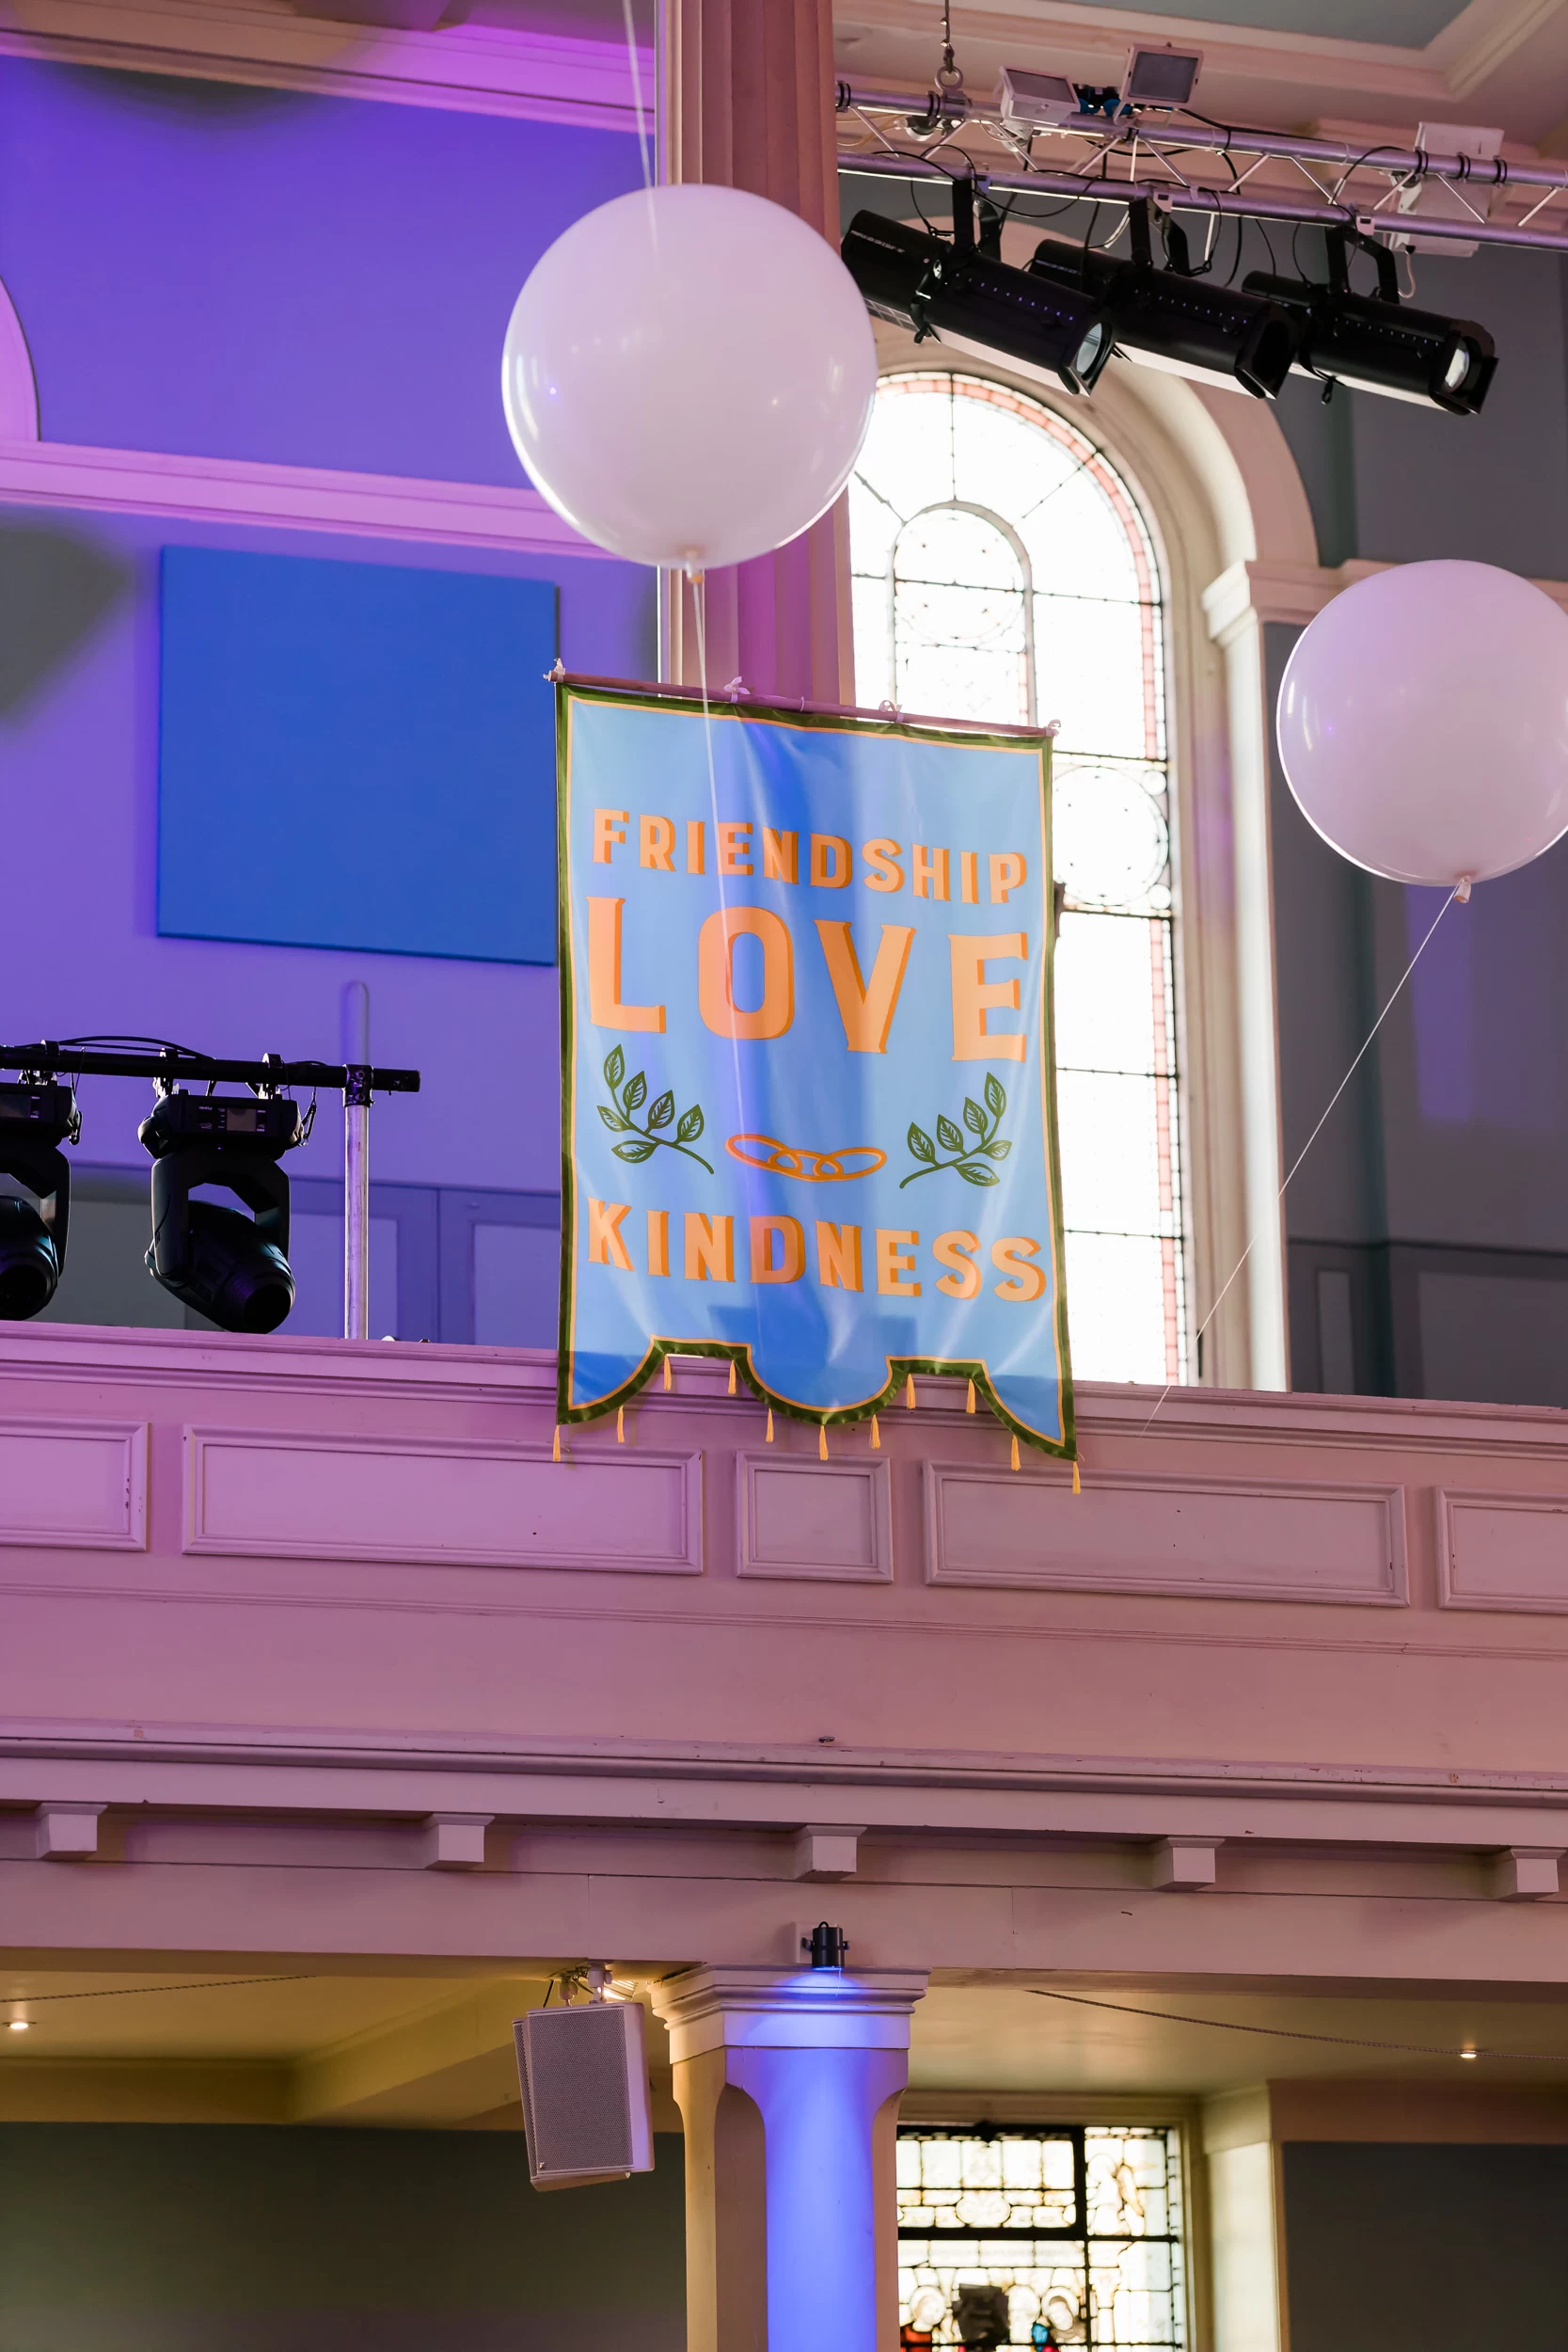 Friendship love and kindness banner at the Congregation of Inspiration